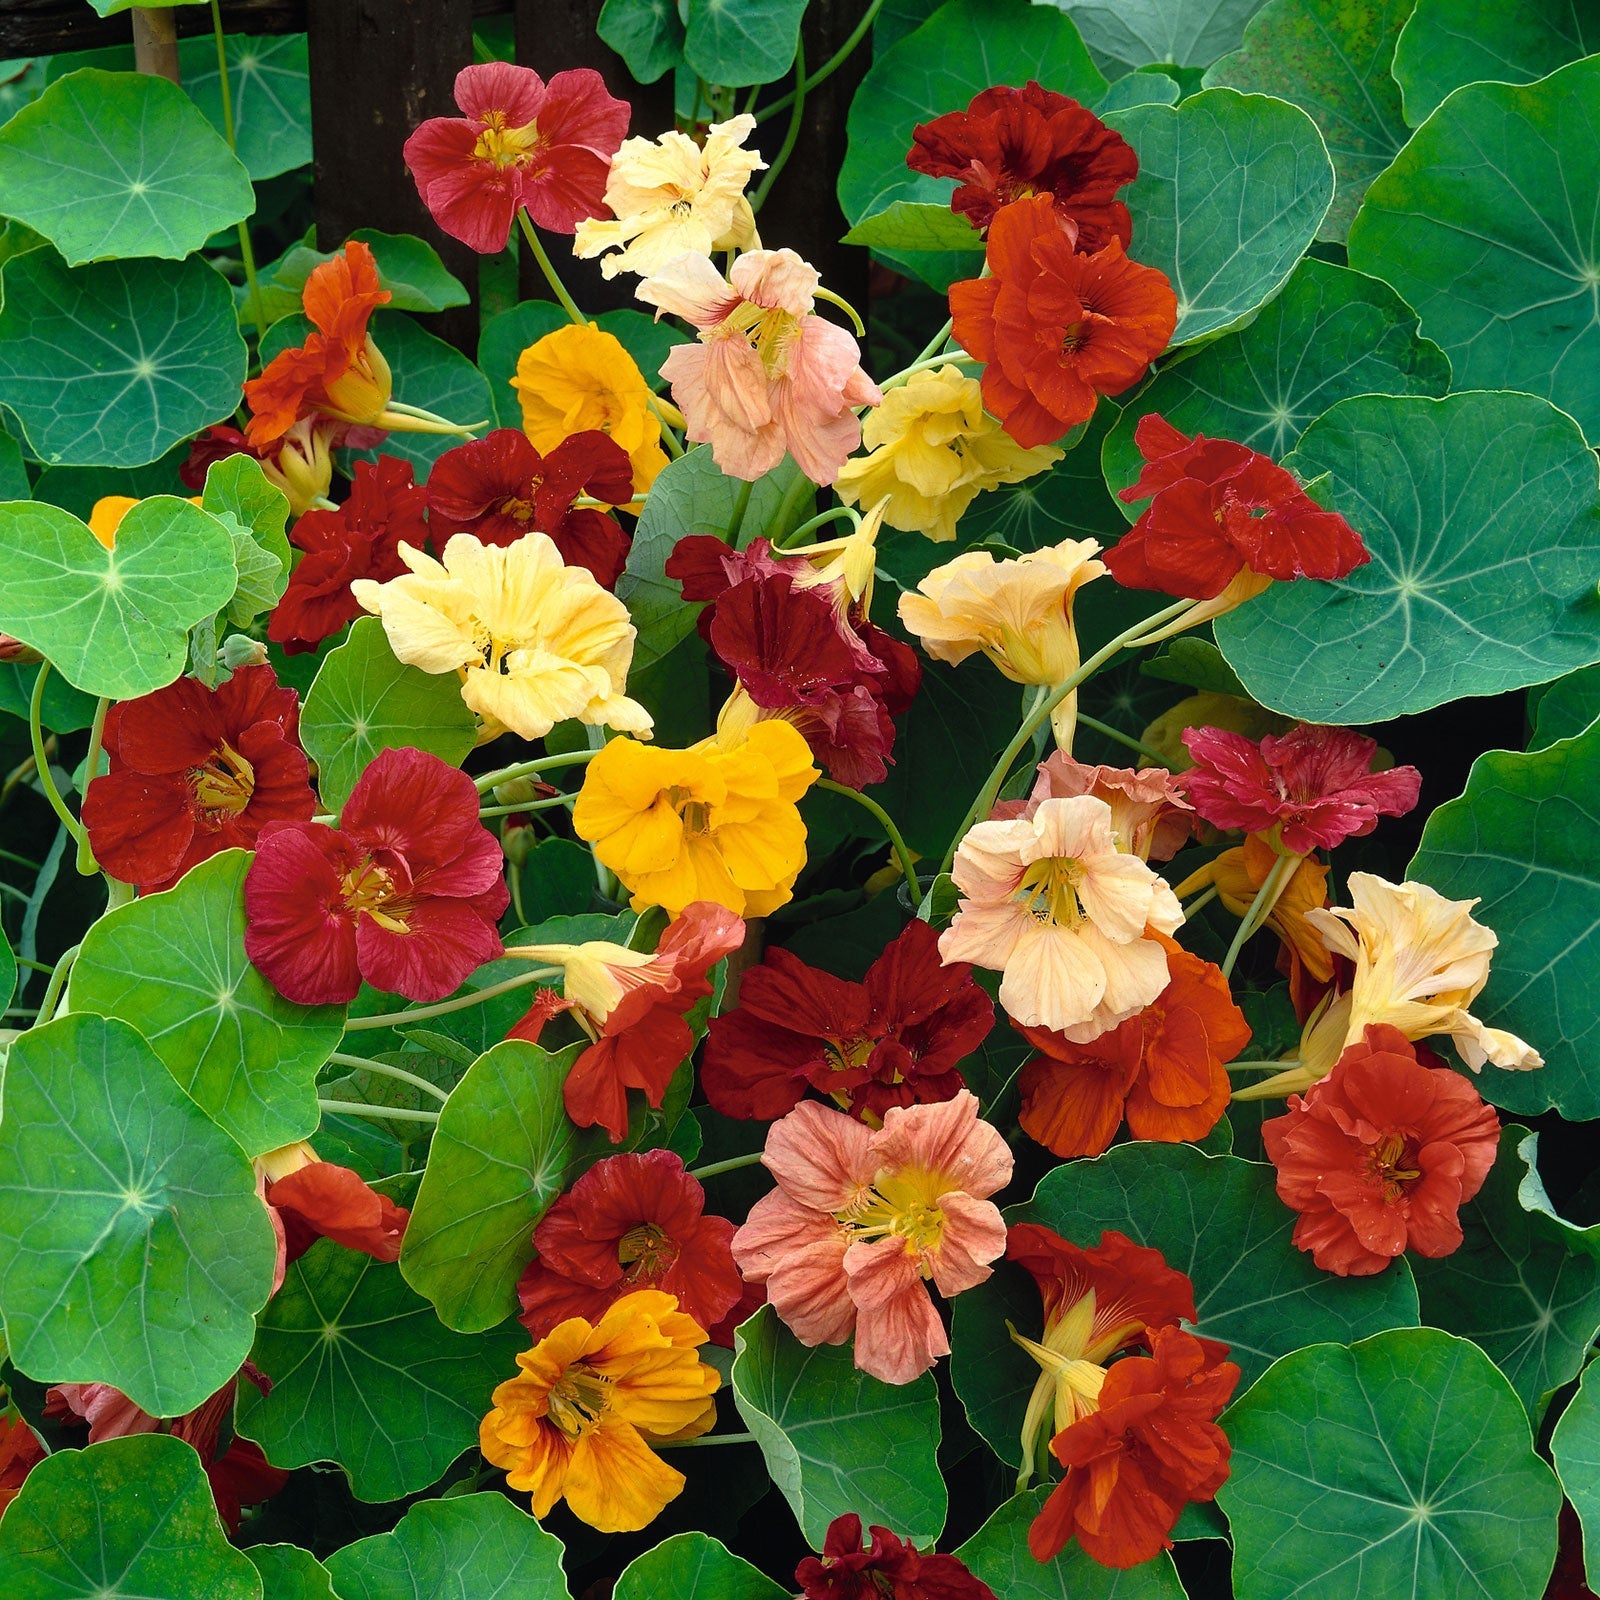 When to plant nasturtium seeds – for a show of hot colors